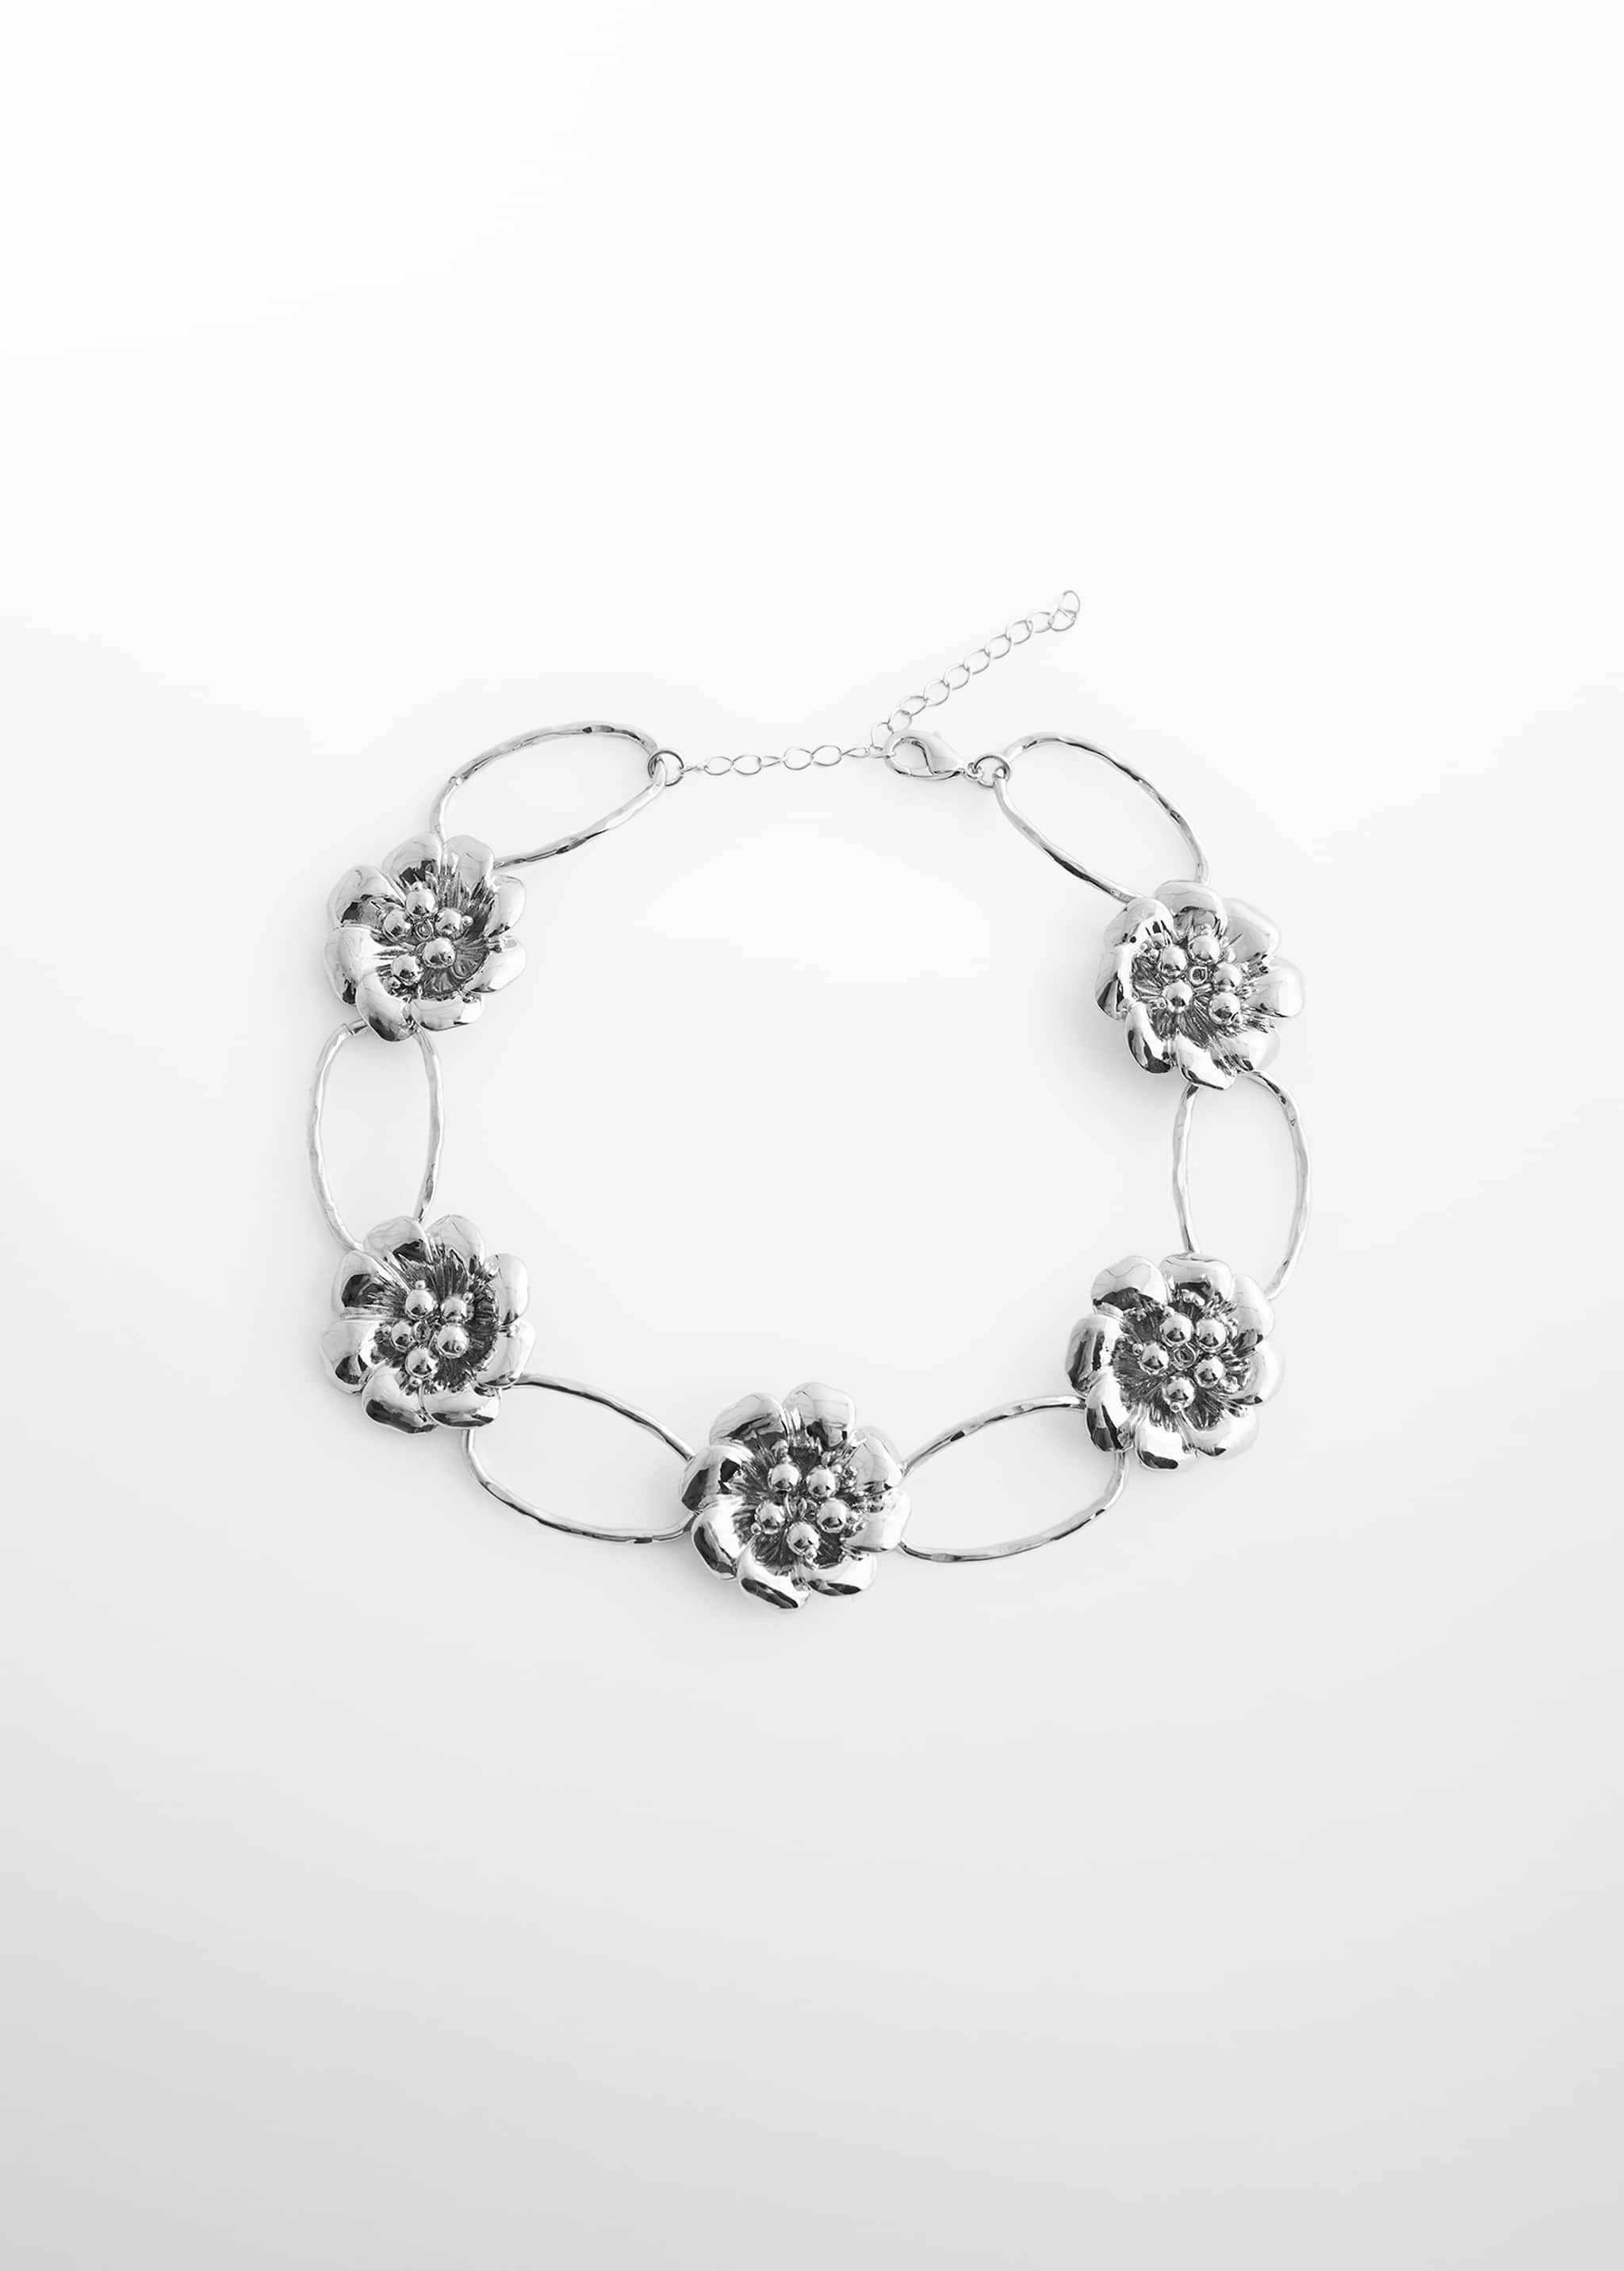 Metallic flower necklace - Article without model